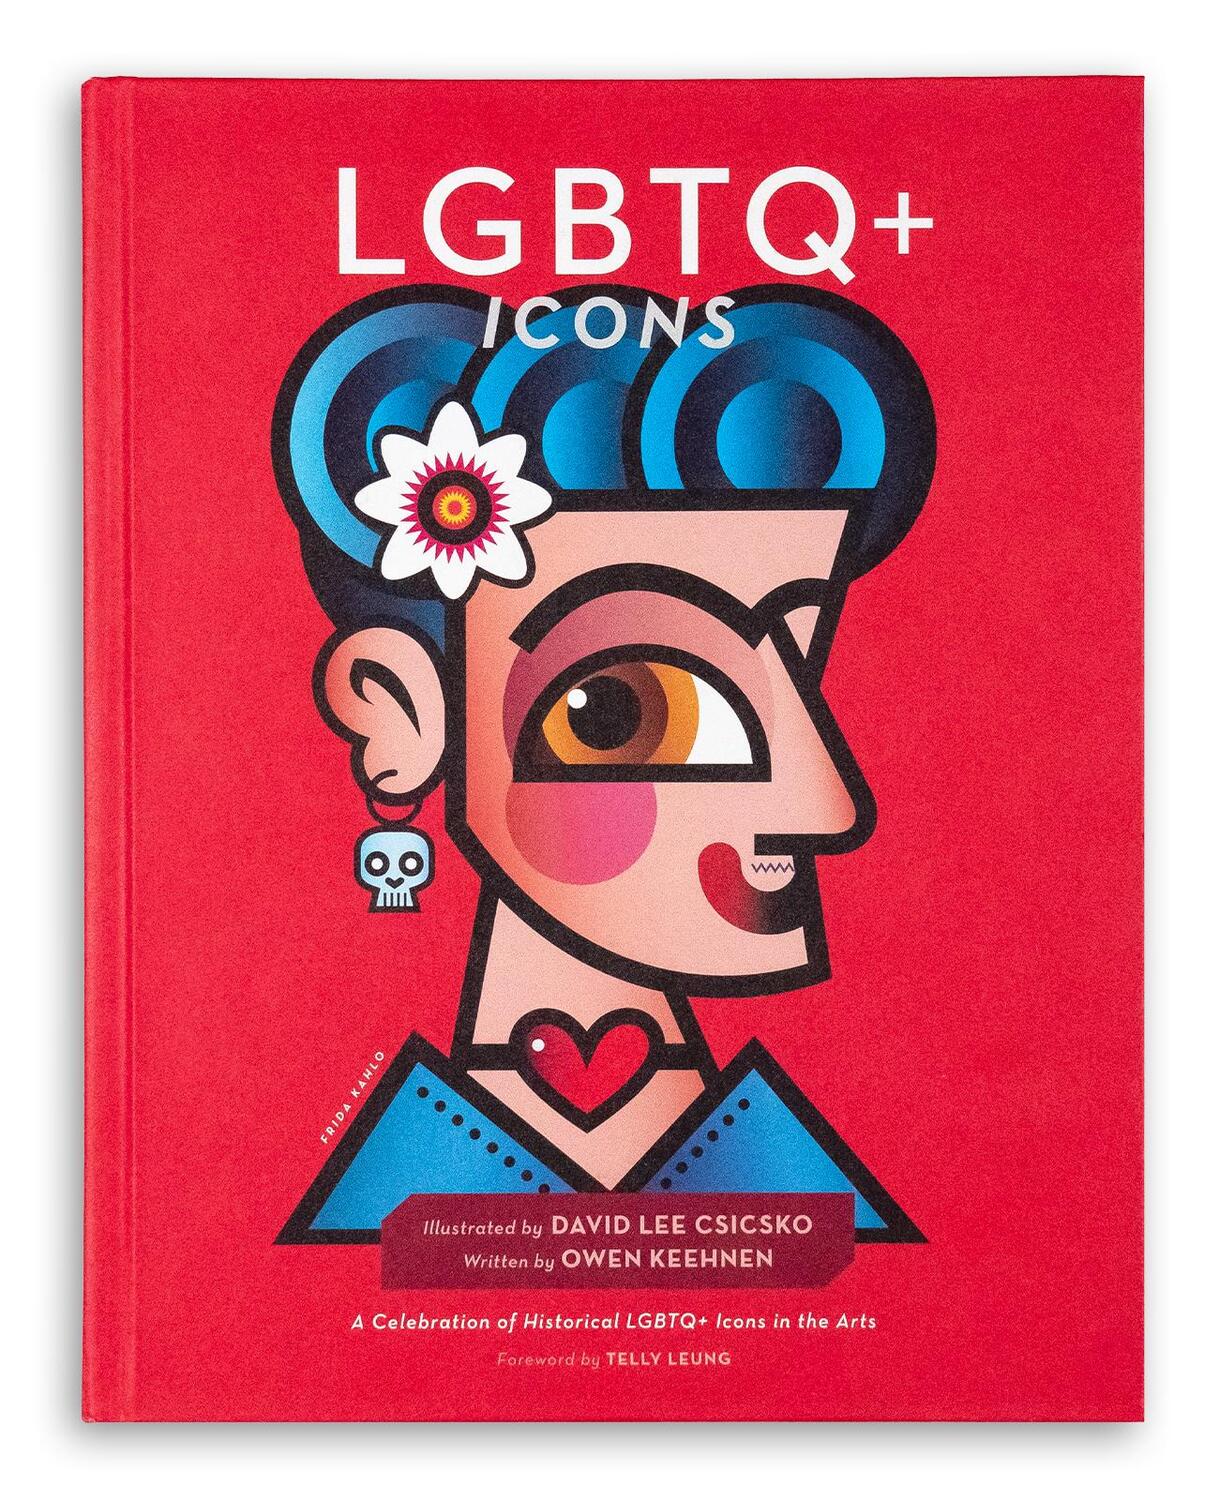 Bild: 9781951963118 | LGBTQ+ Icons | A Celebration of Historical LGBTQ+ Icons in the Arts